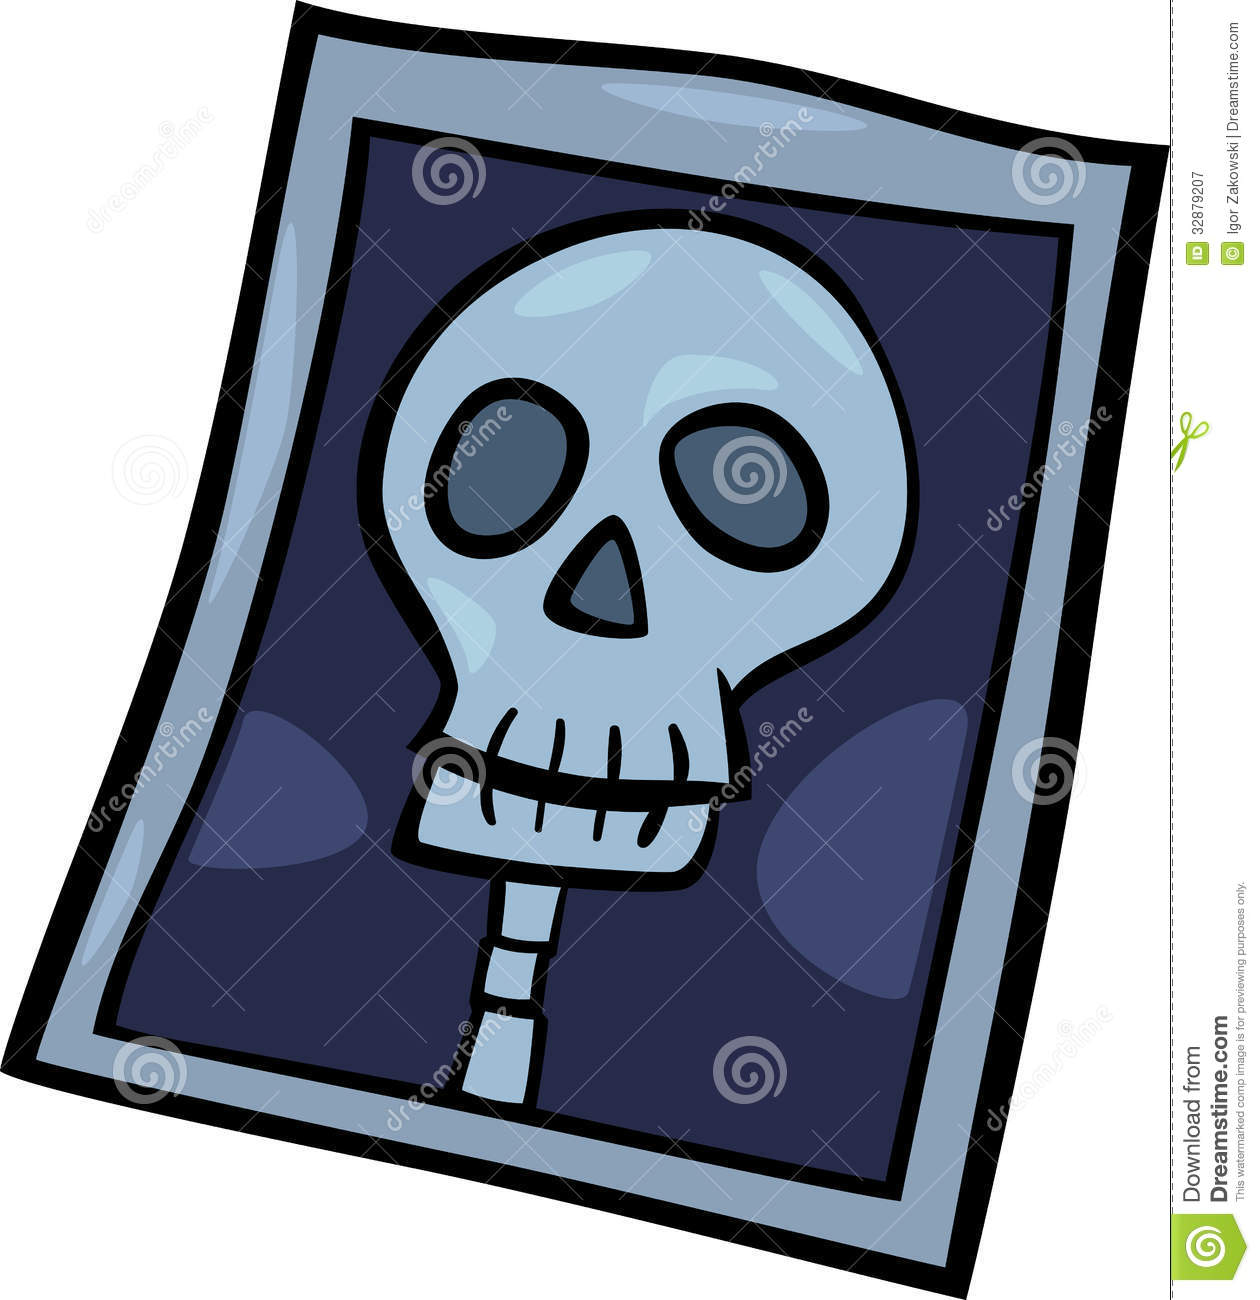 Radiology Clipart   Clipart Panda   Free Clipart Images